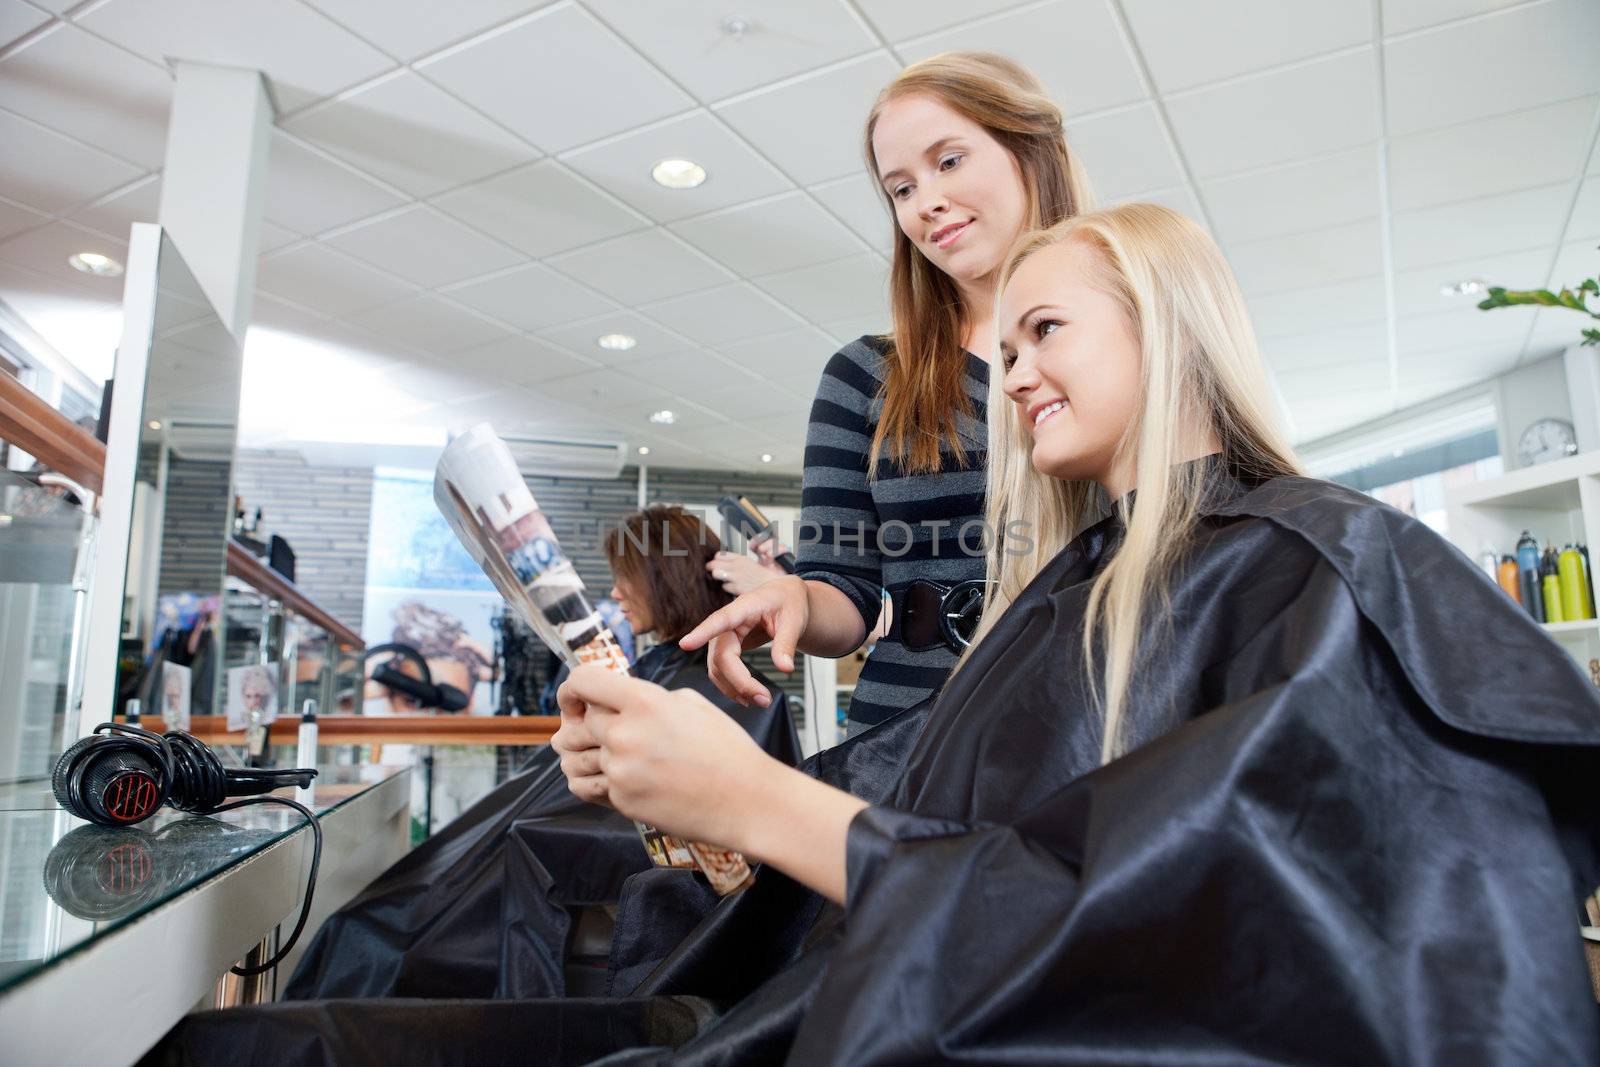 Hairdresser pointing at magazine held by female customer in parlor